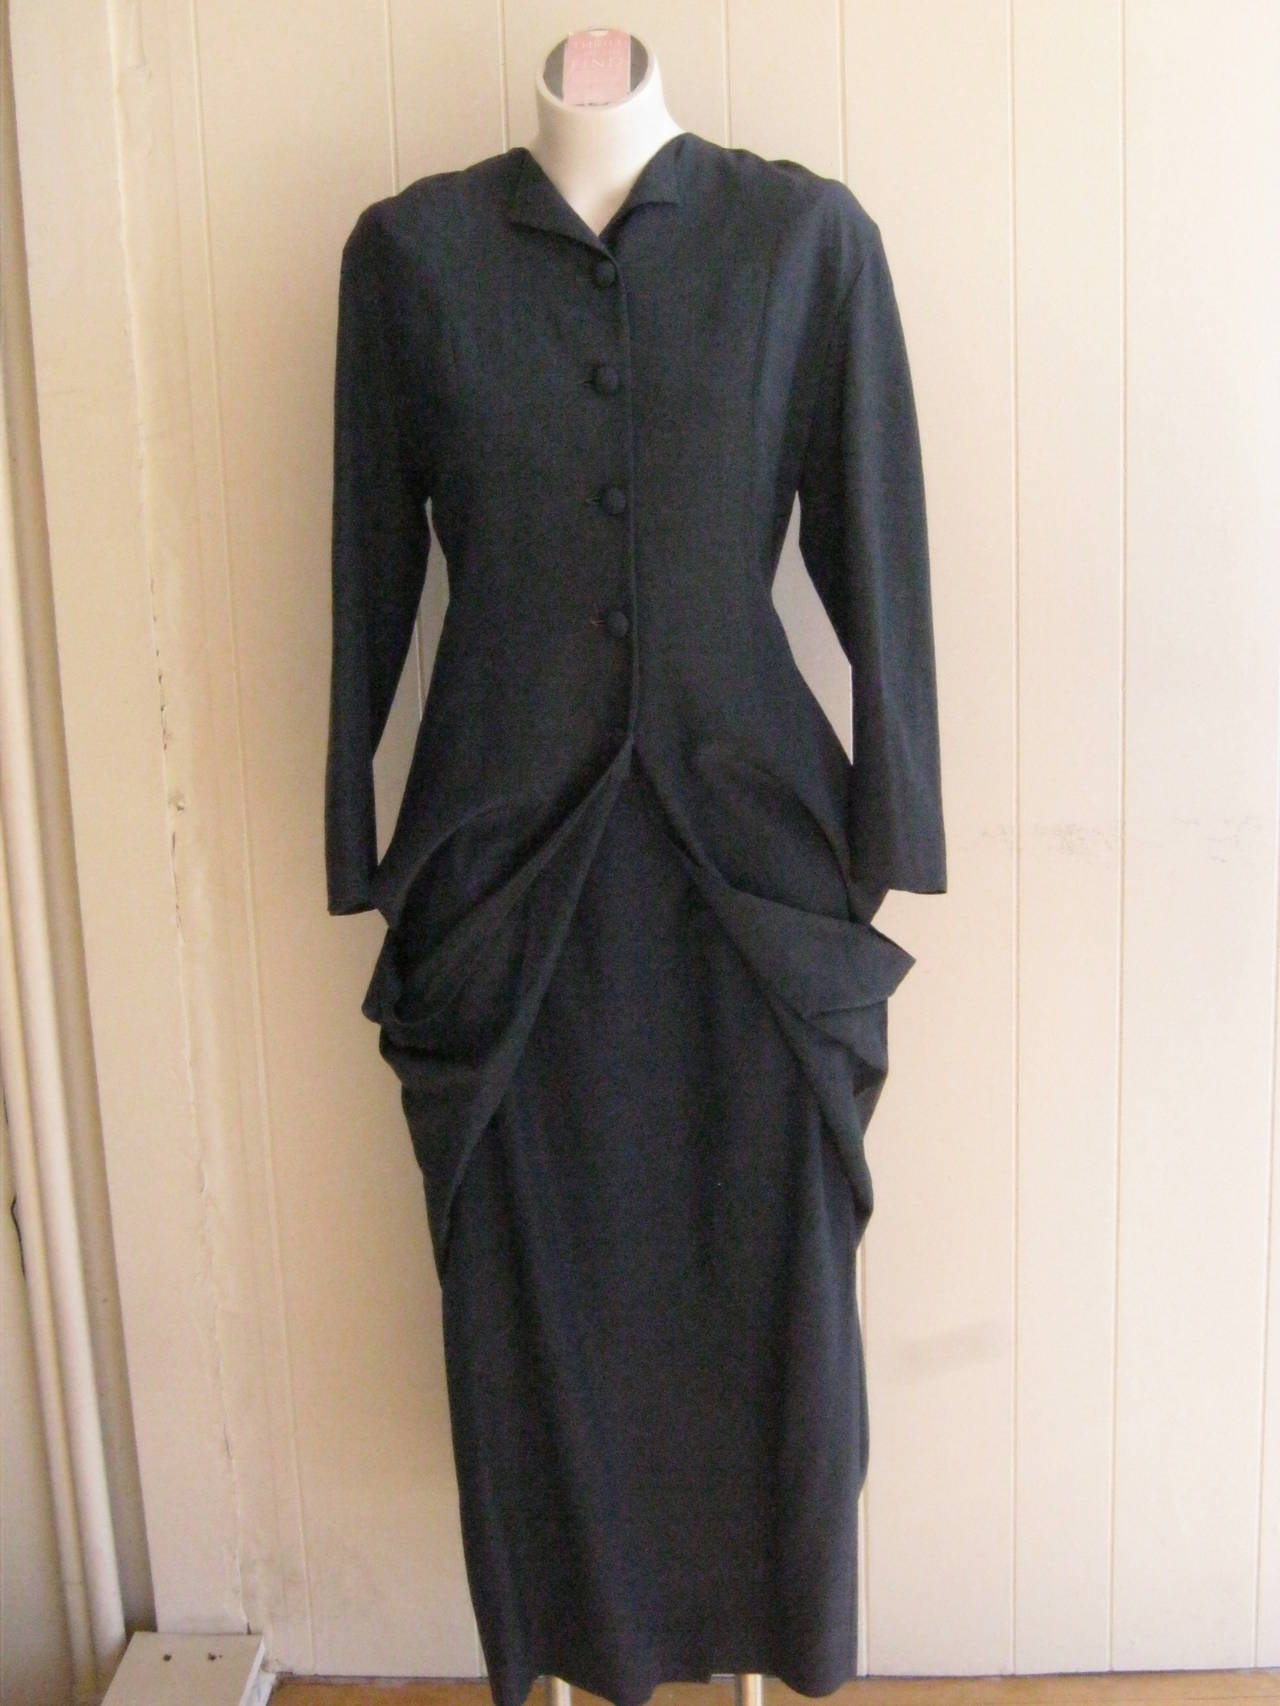 Only the jacket is featured on the picture as I wanted you to see the fantastic detail which brings to mind a redingote or the Edwardian frock coat! The skirt is long, straight and high waisted. The material feels like a blend of light wool and